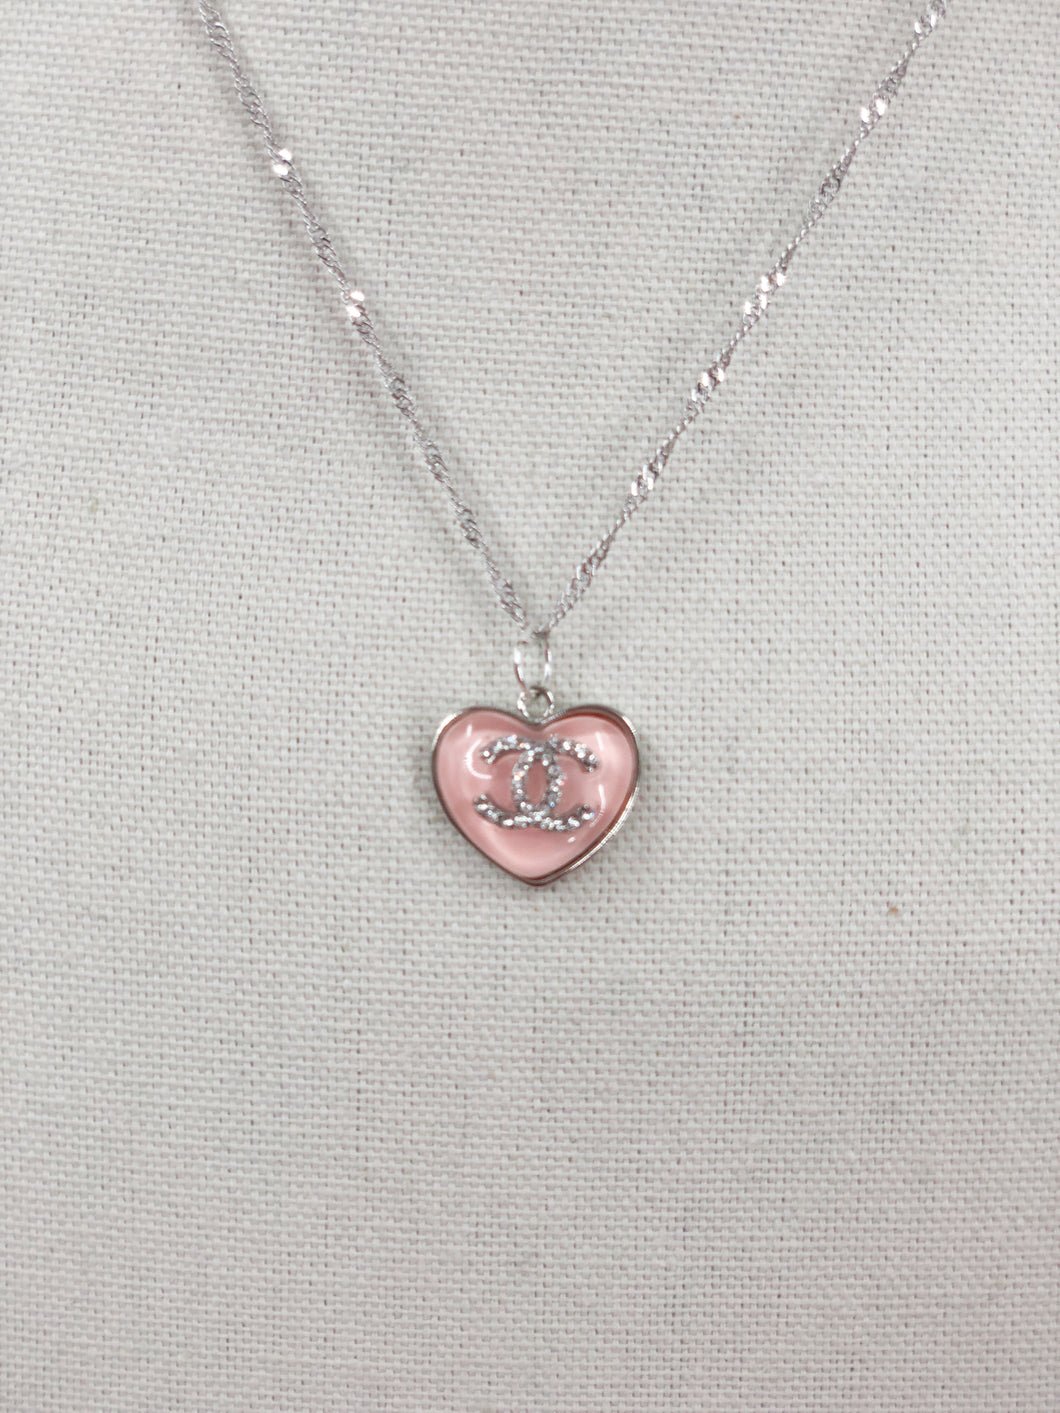 This unique piece is a valuable find. The delicate vintage CC heart zipper pull, adorned with dazzling clear crystals, adds a touch of charm in soft pink. Exude radiance and make a statement when you wear this gorgeous piece.